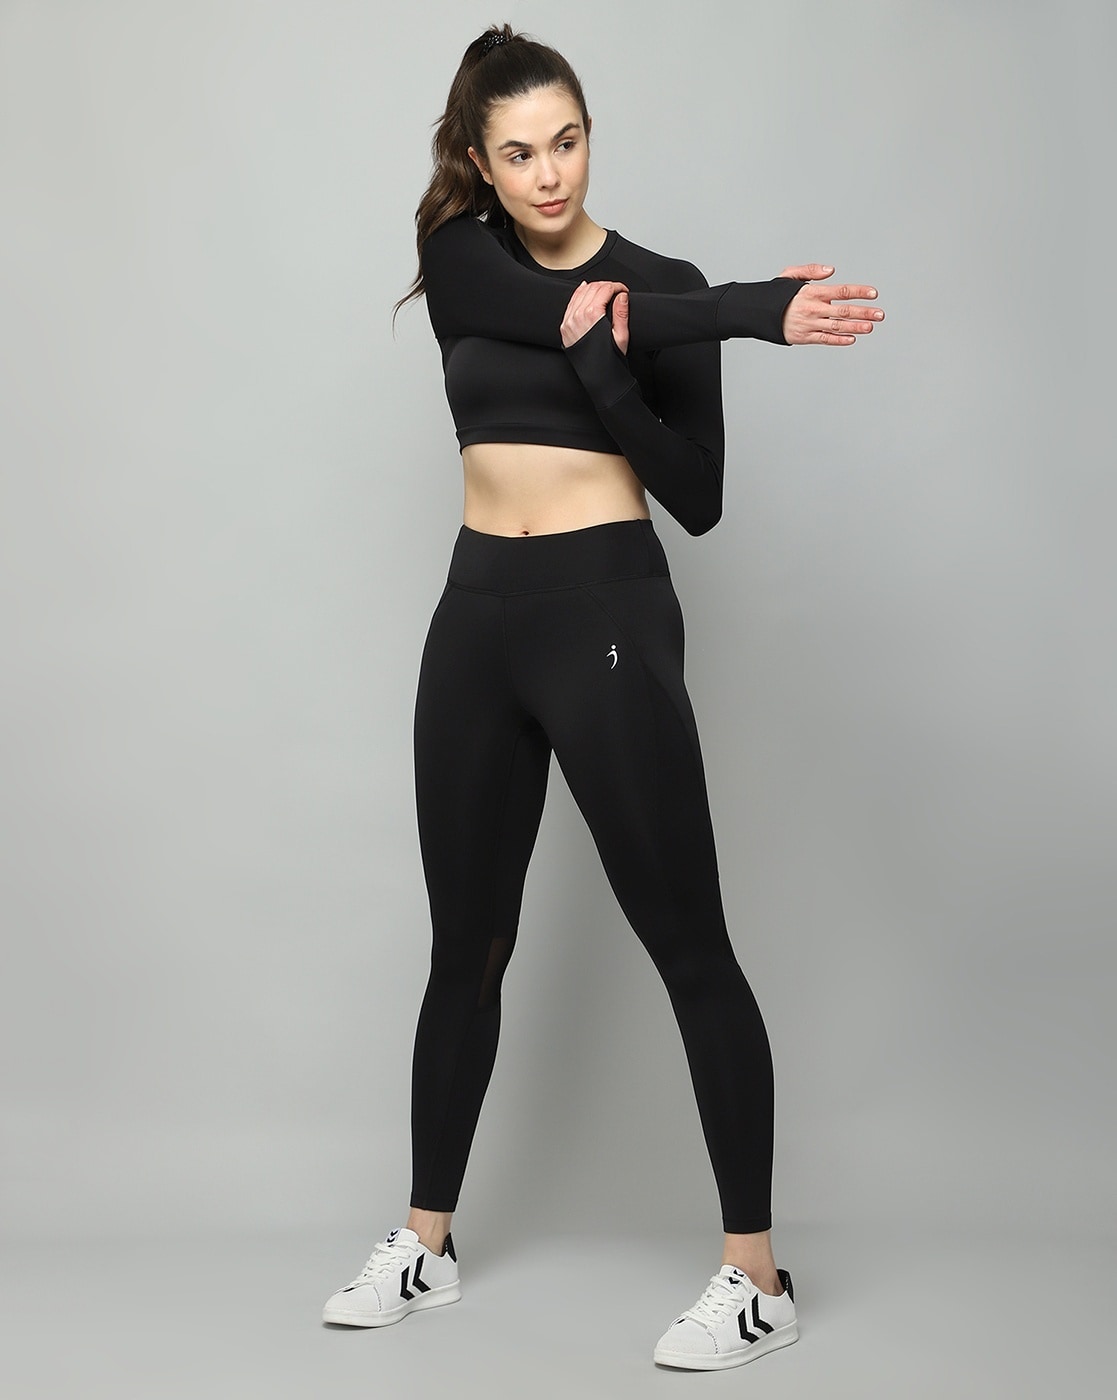 Tuna London Lingerie  Tuna London New Stylish Active Wear Tights For Women  In Black Color Online  Nykaa Fashion